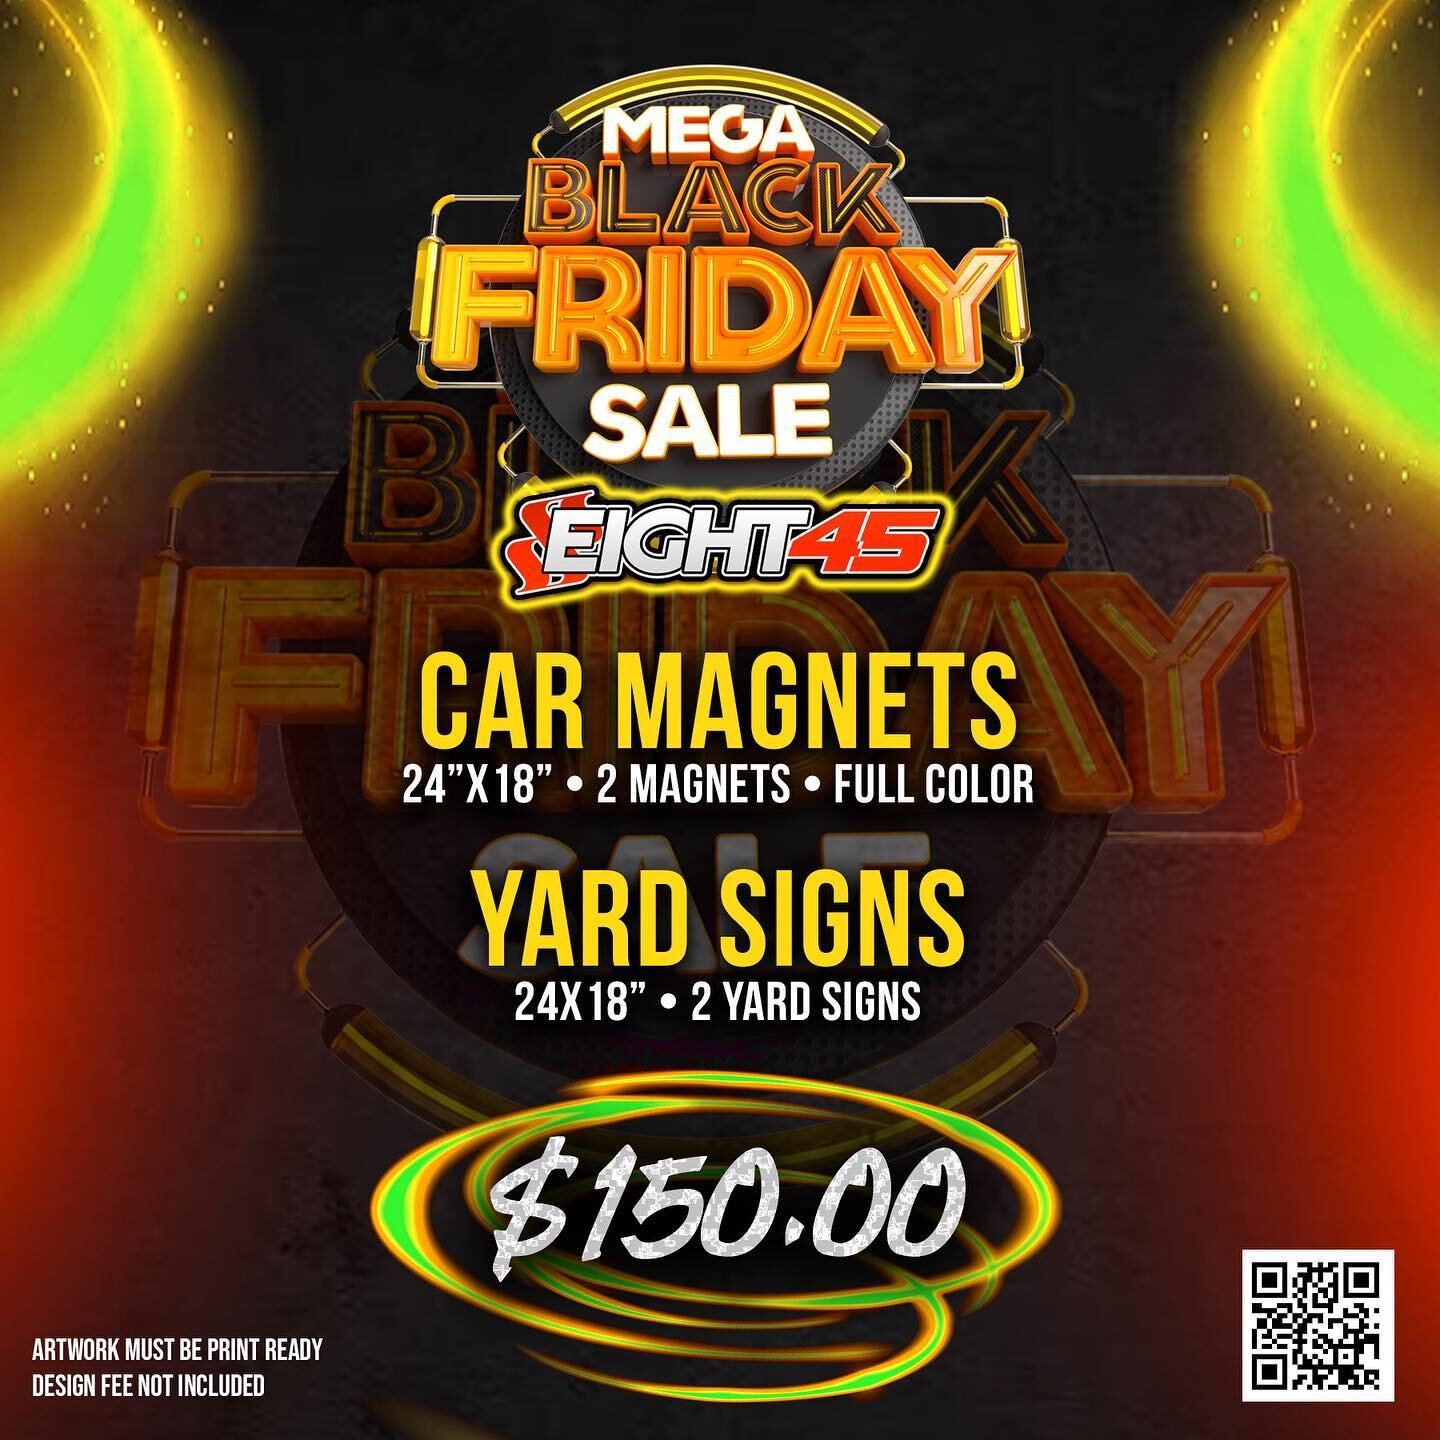 🌟 Don't Miss Our Black Friday Specials! 11/20-11/25🌟

🎉 Get Ready for Incredible Deals on Business Cards, Yard Signs, Car Magnets, and T-Shirts! 🎉

📇 Business Cards: Make a lasting impression with our high-quality business cards! Stand out from 